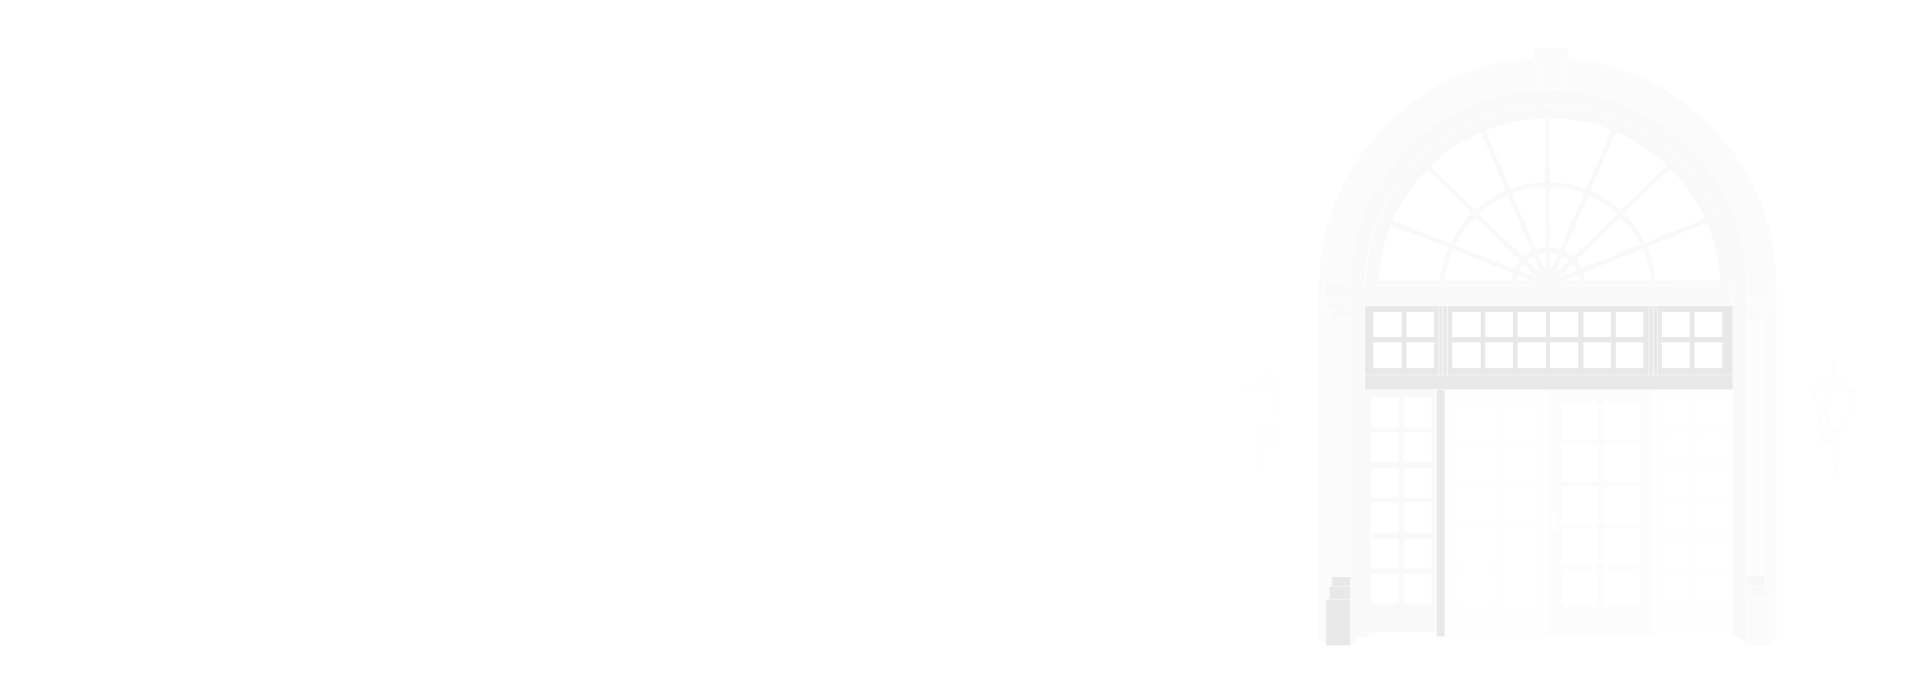 Wilkerson Funeral Home Logo